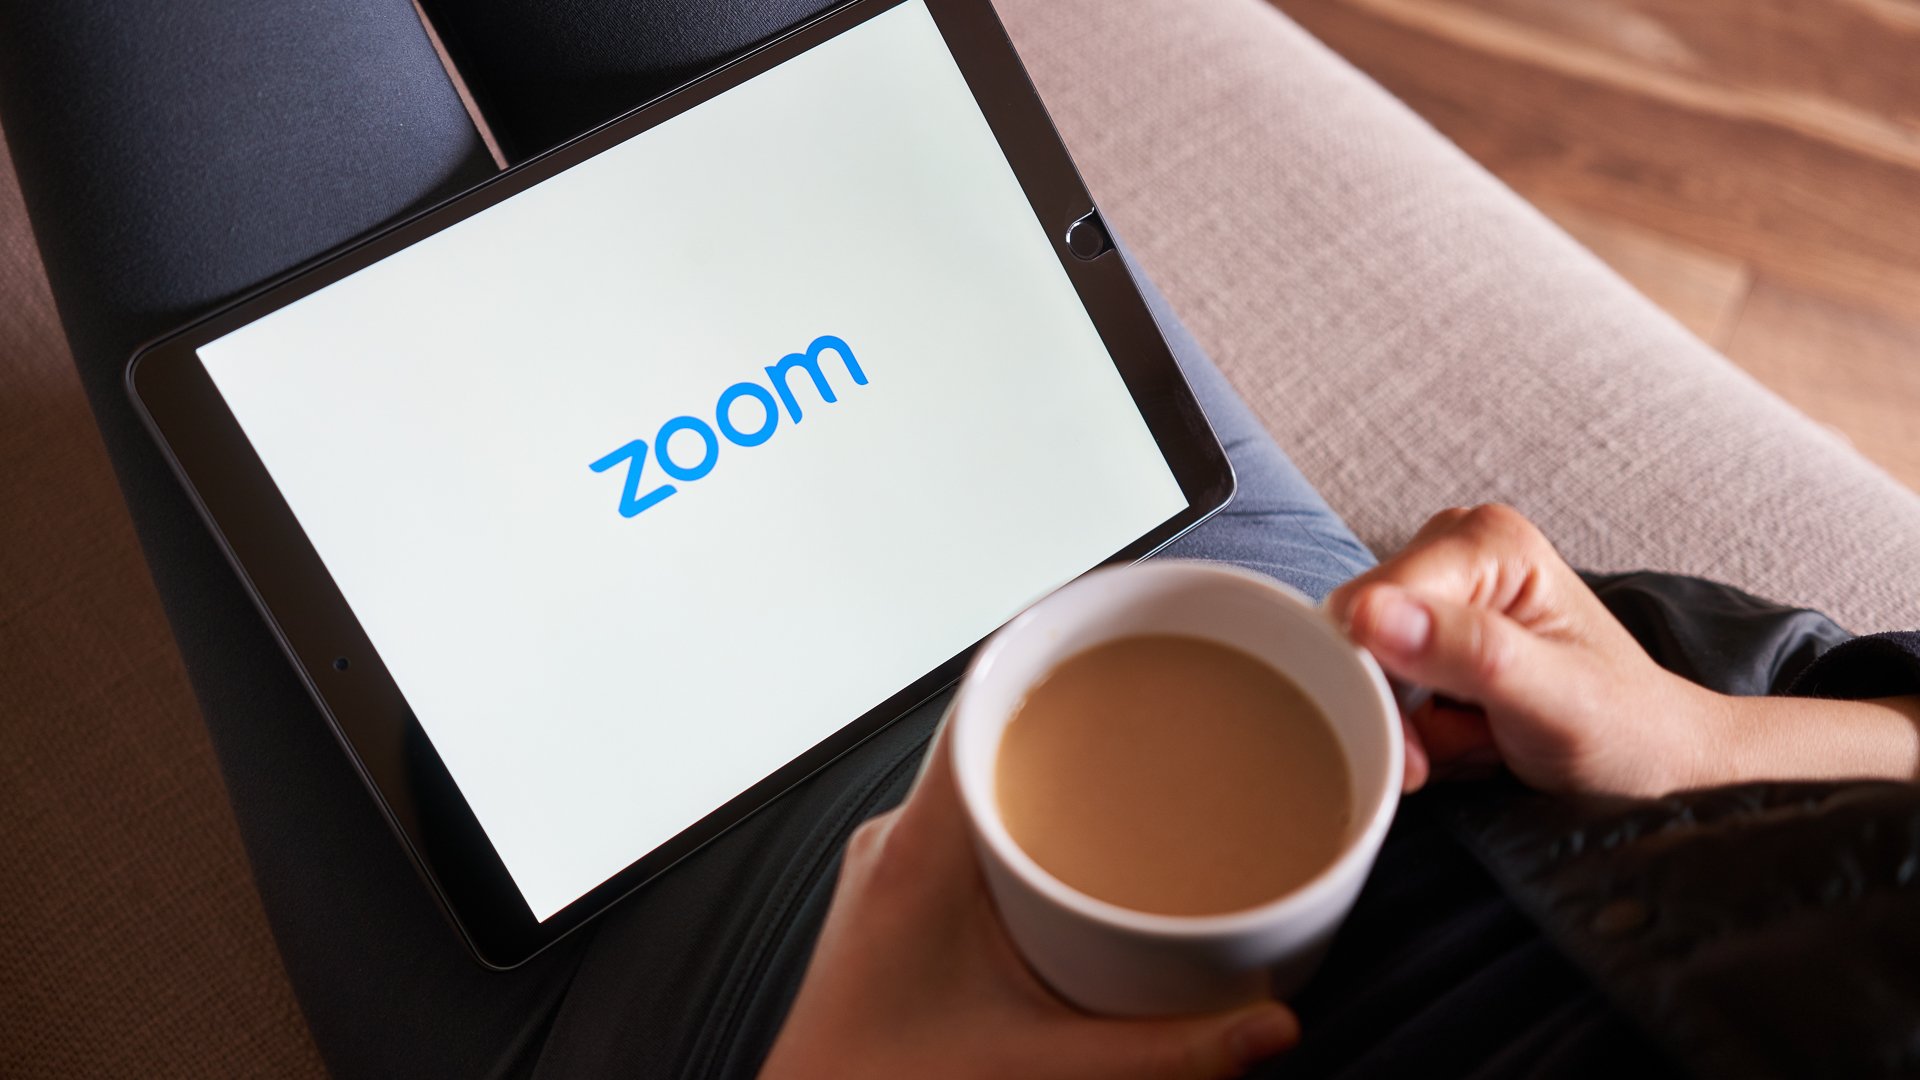 Looking Back at the Huge Year for Zoom